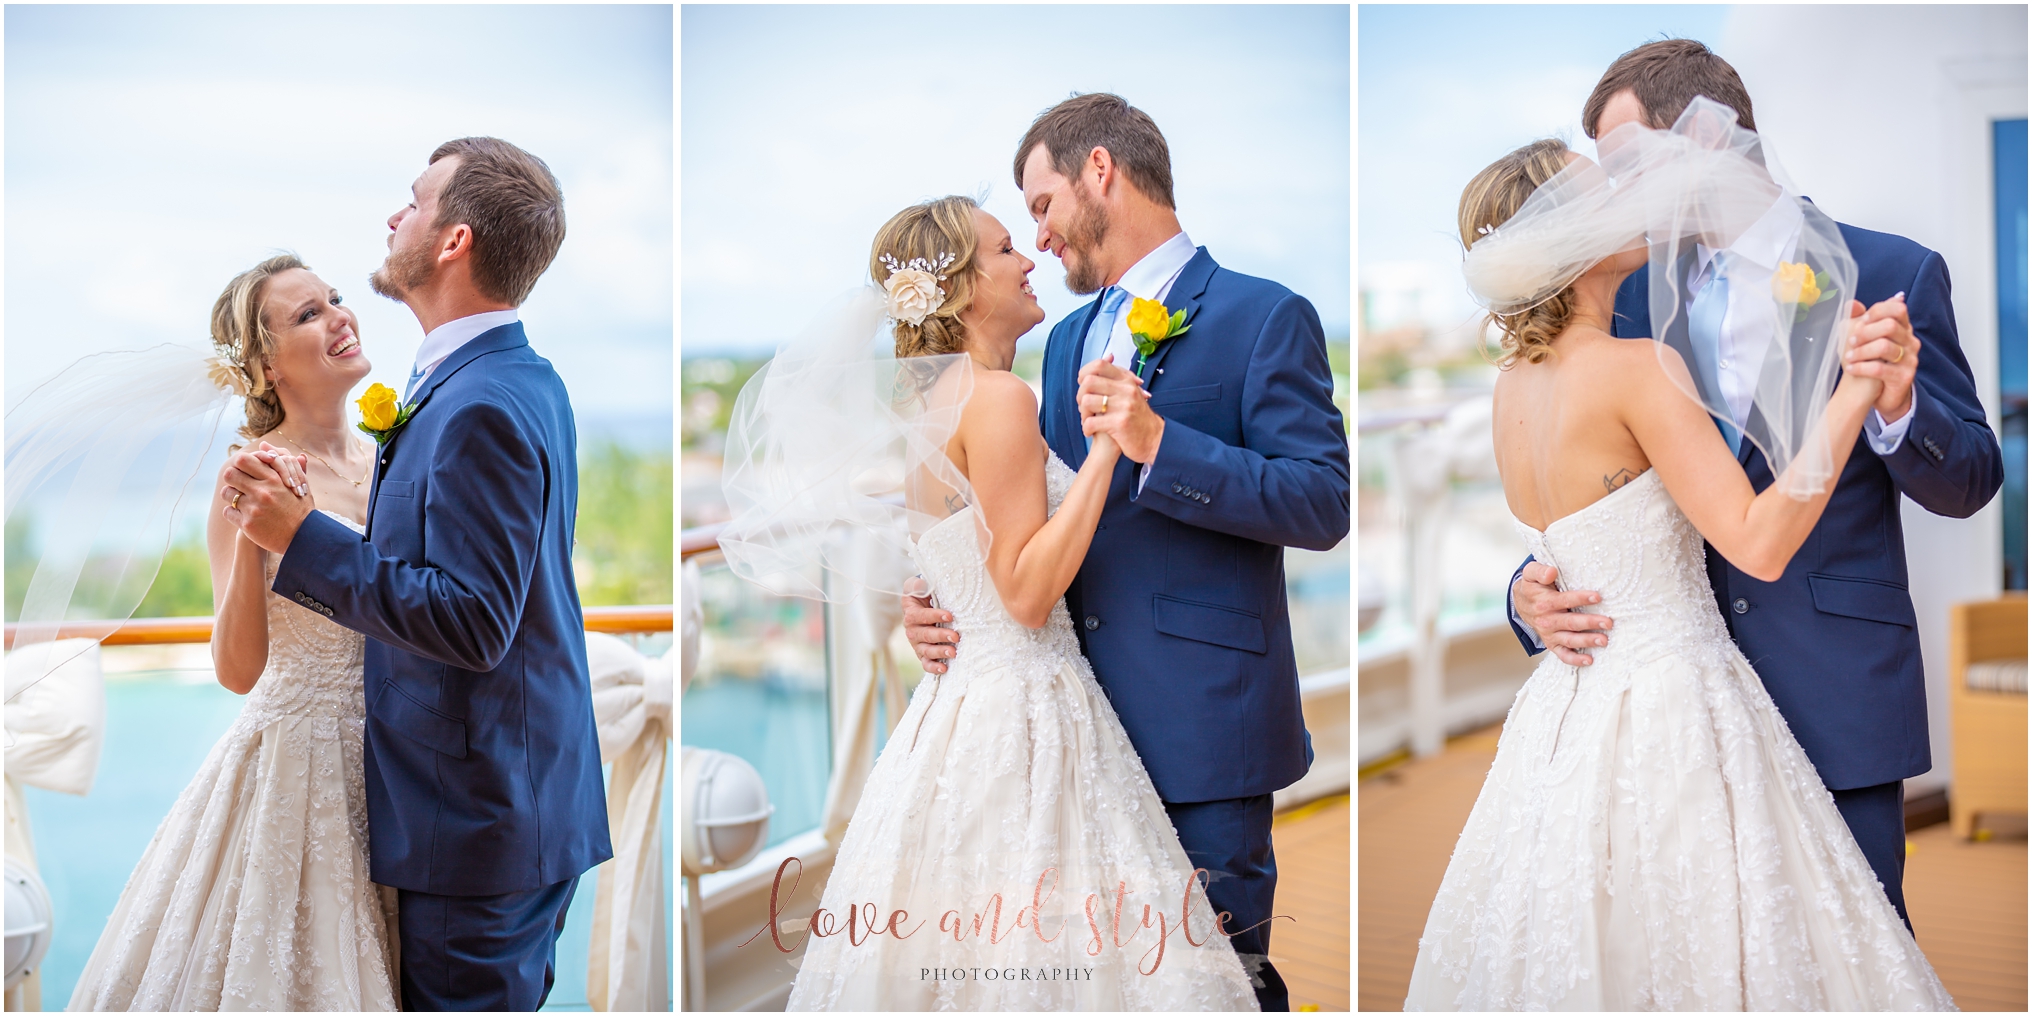 Disney Dream Cruise Wedding Photography of the bride and groom's first dance